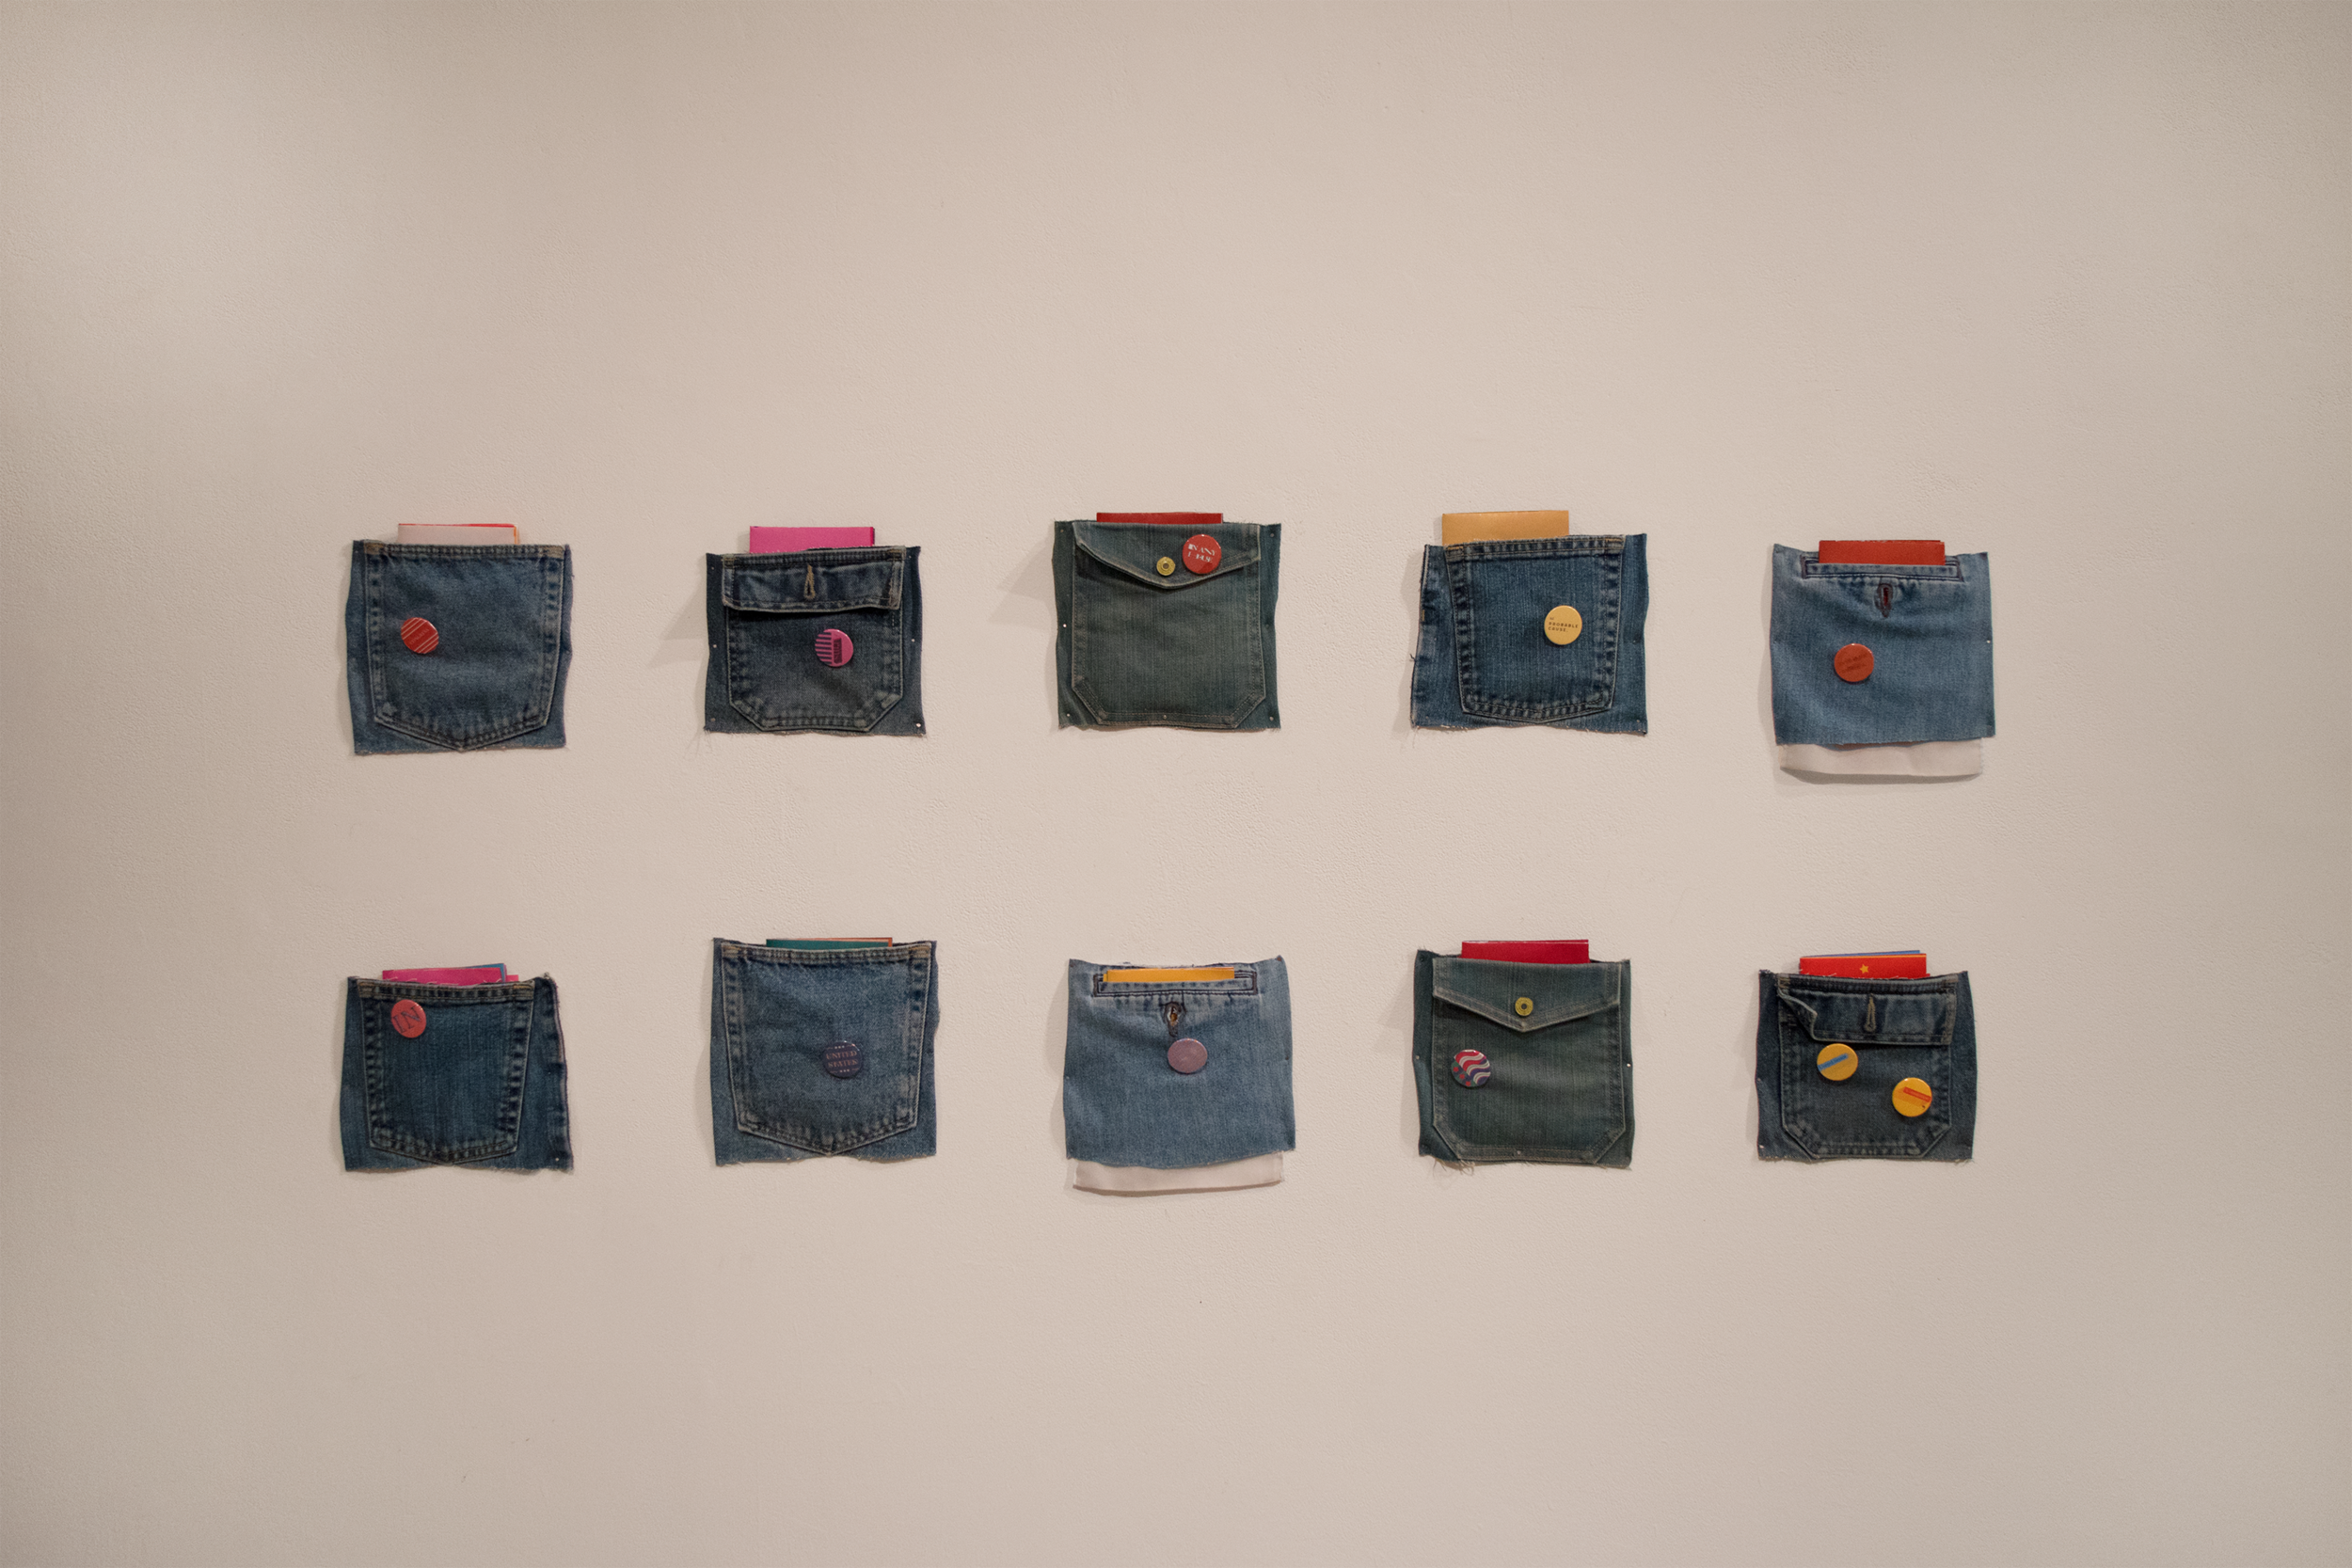  The zines were displayed in denim pockets, a nod to a quintessential United States fashion garment. 